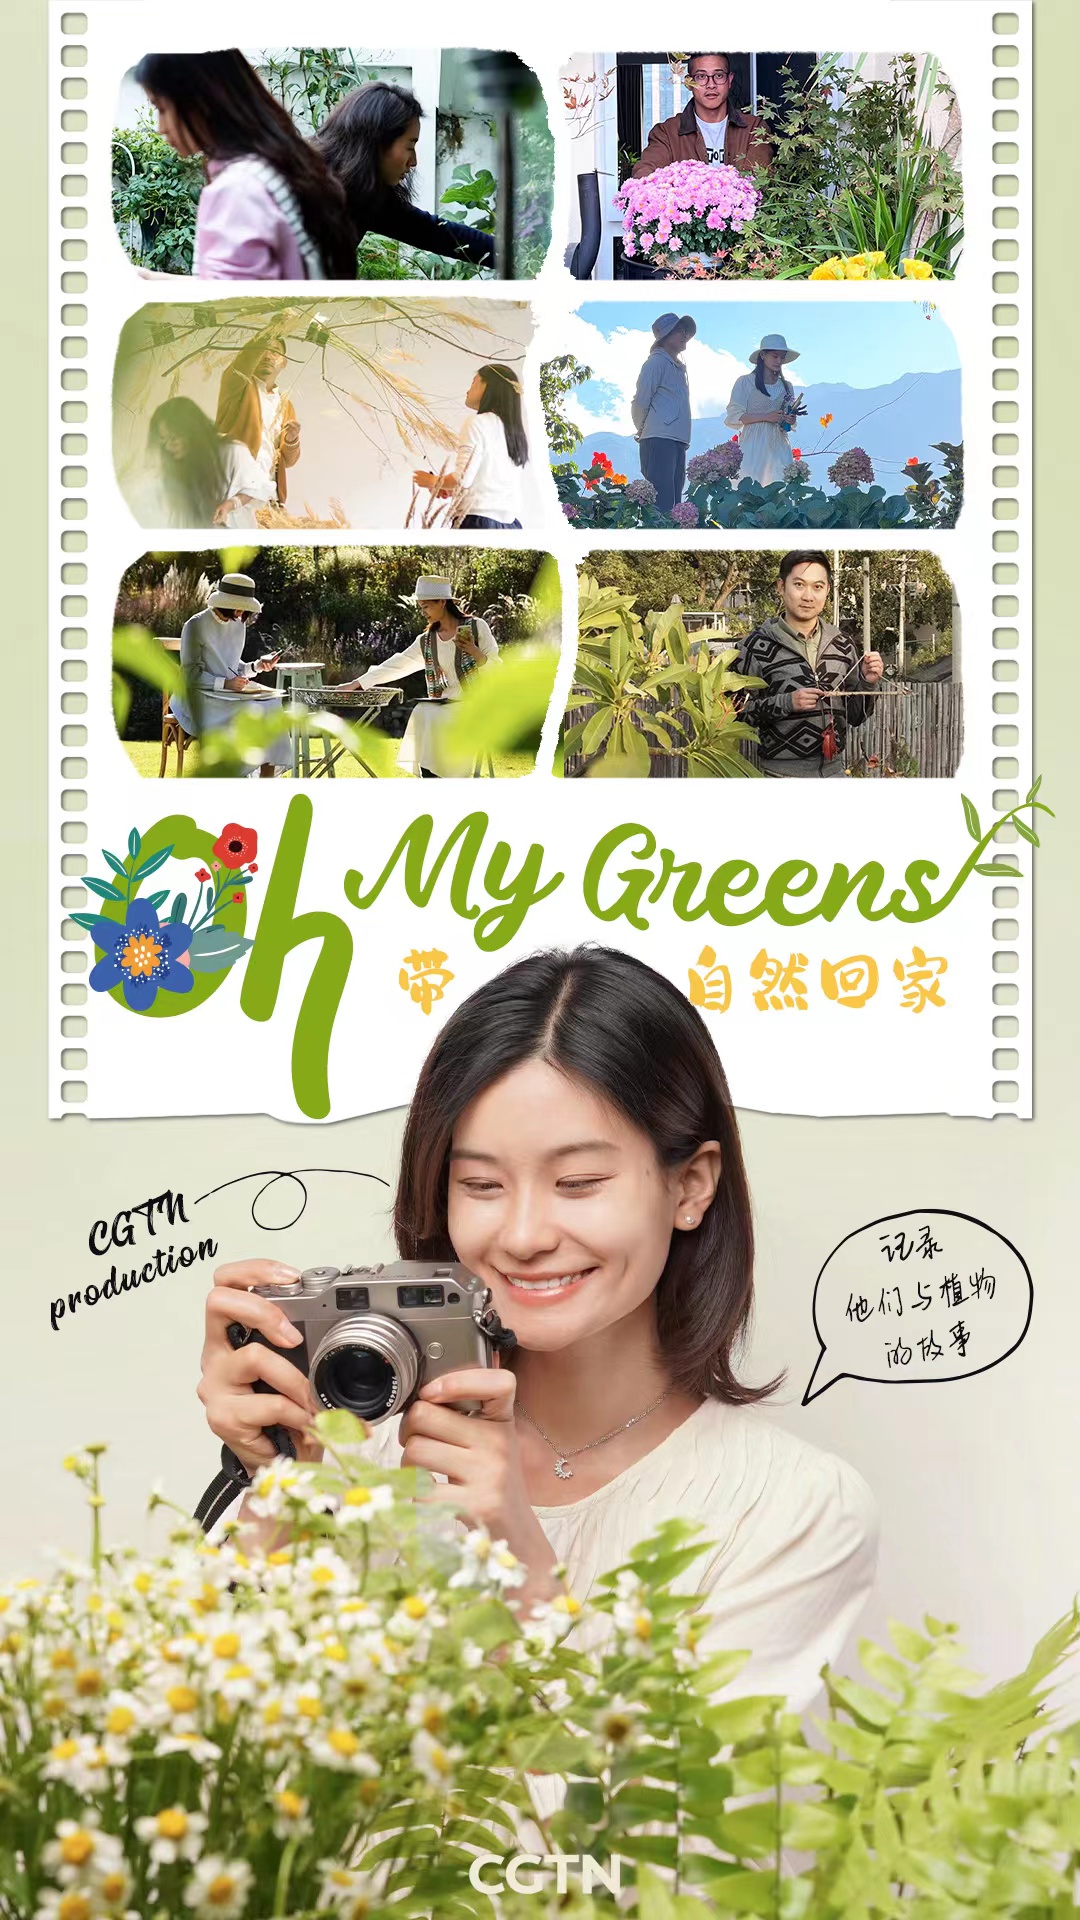 Oh! My Greens - Find Everything About Gardens | CGTN